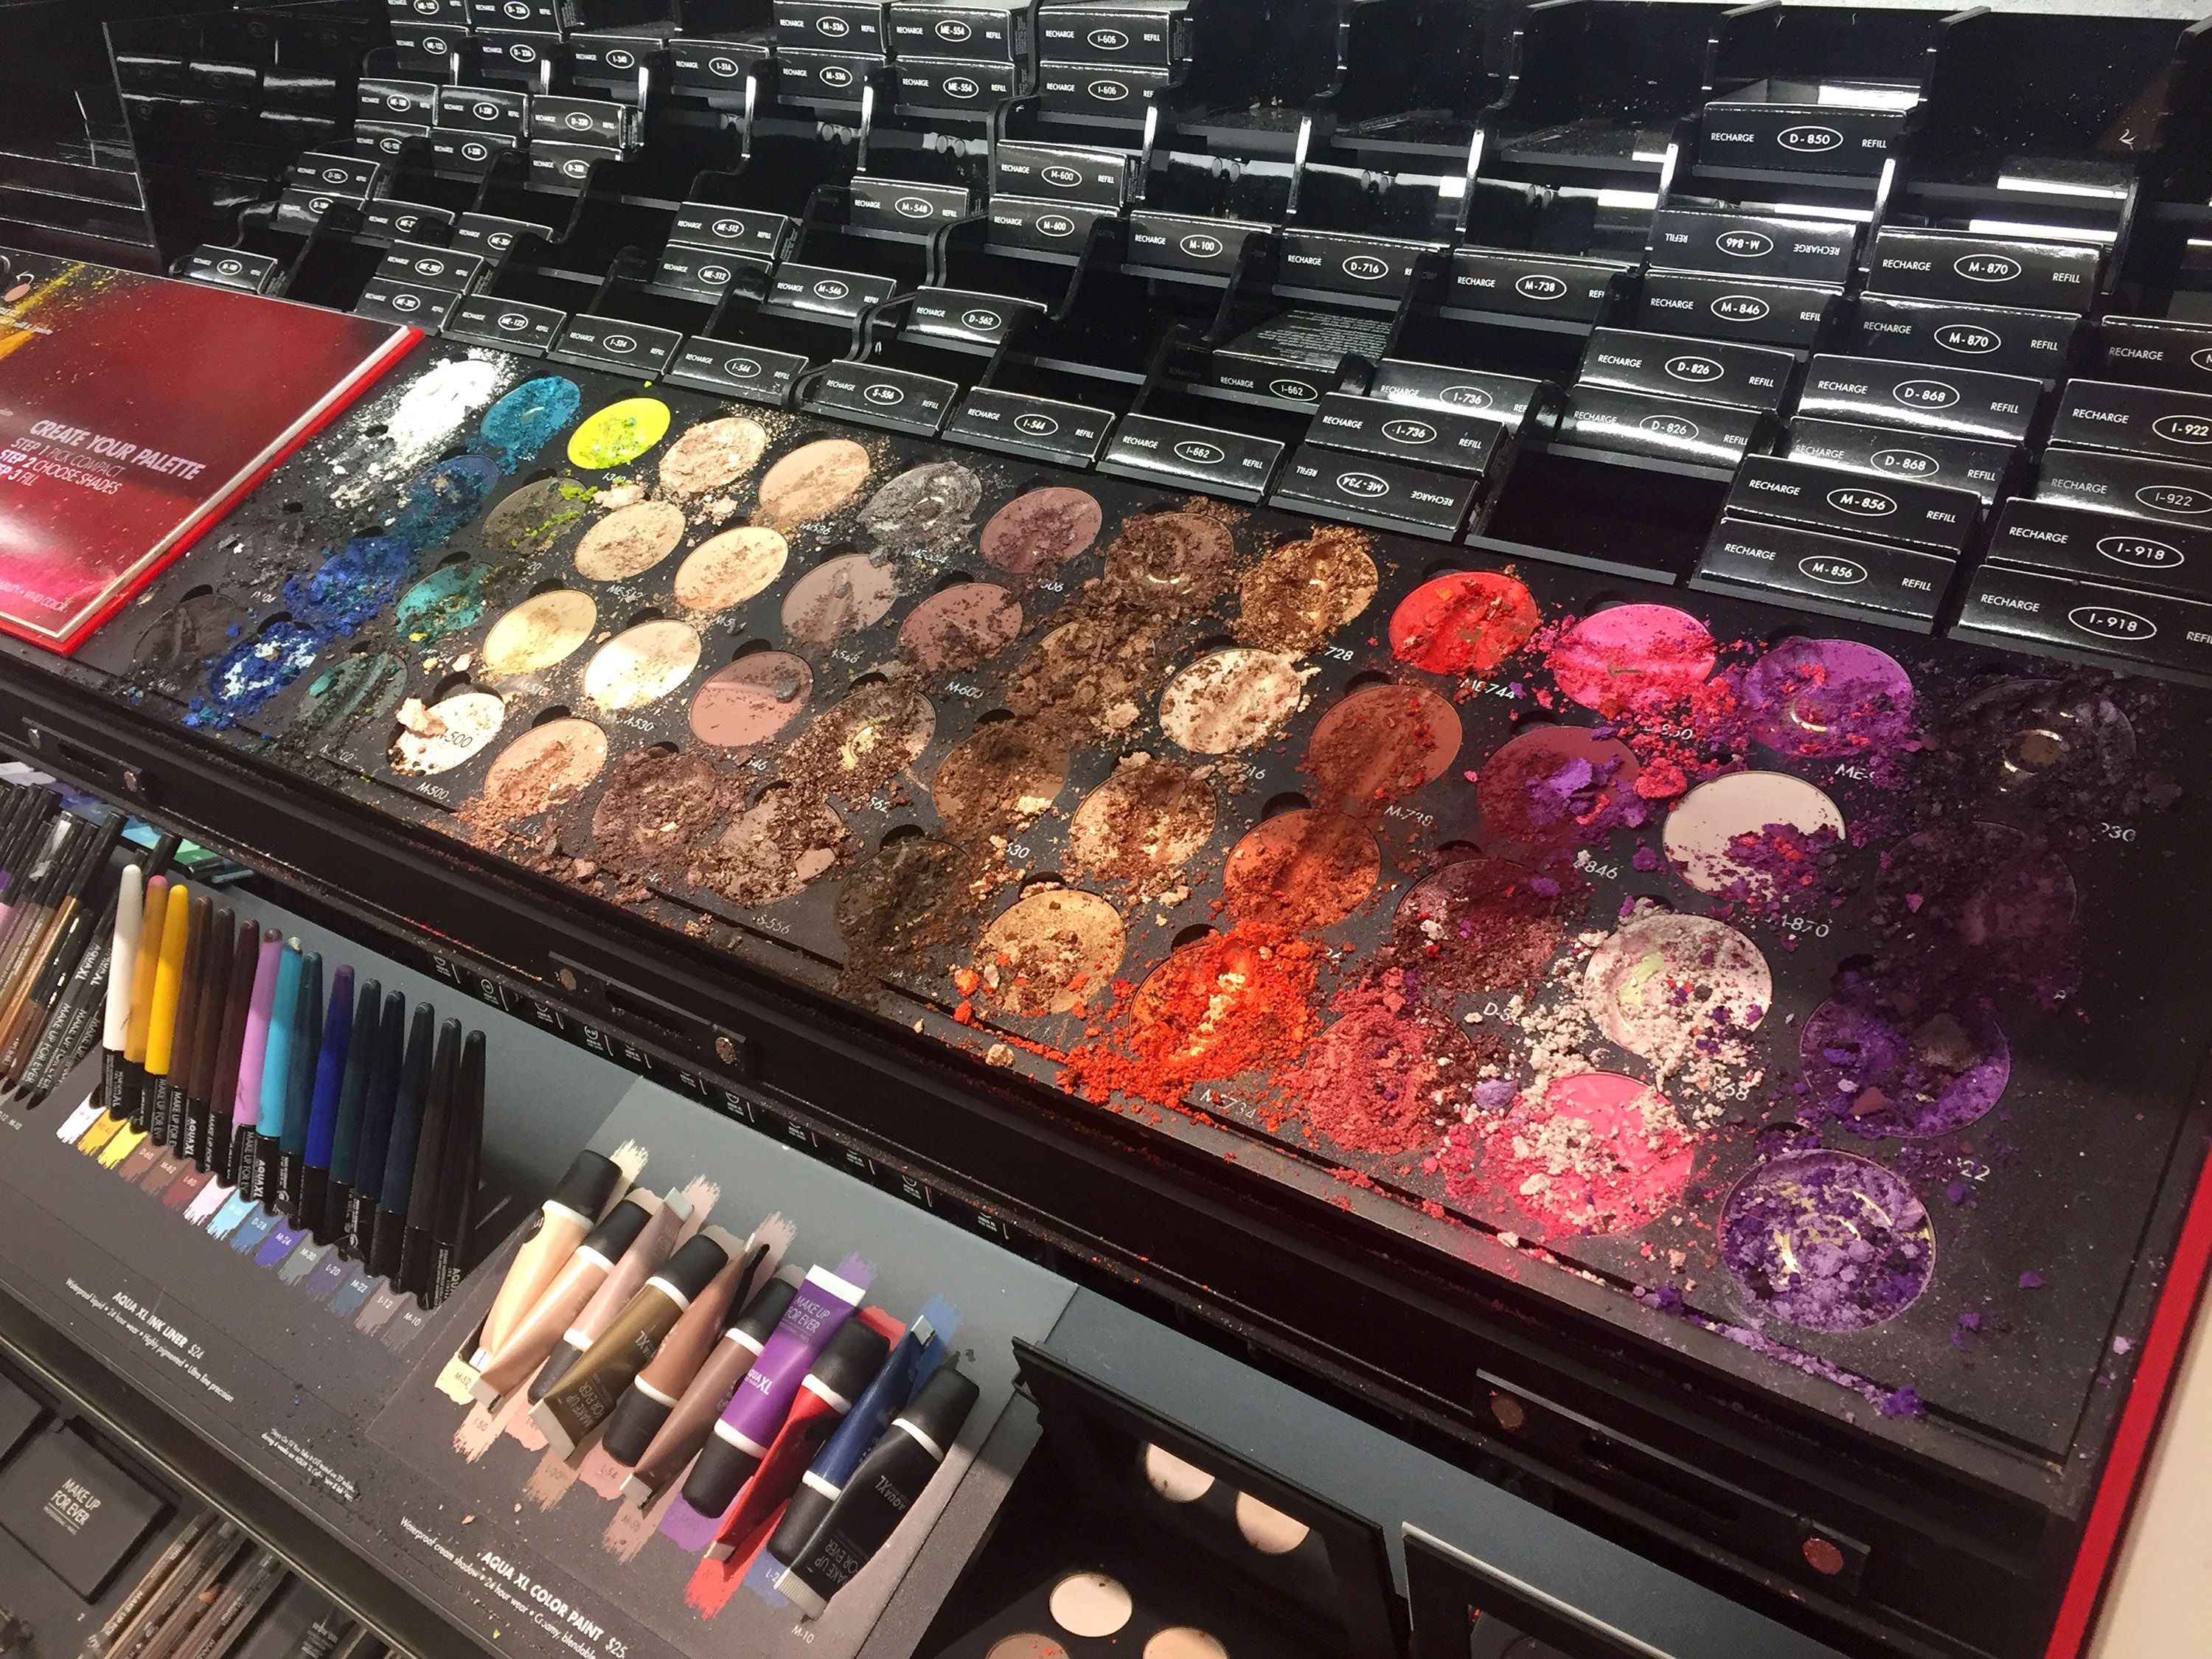 A Child Reportedly Destroyed Over $1,000 Worth of Makeup at Sephora - Sephora  Makeup Destroyed